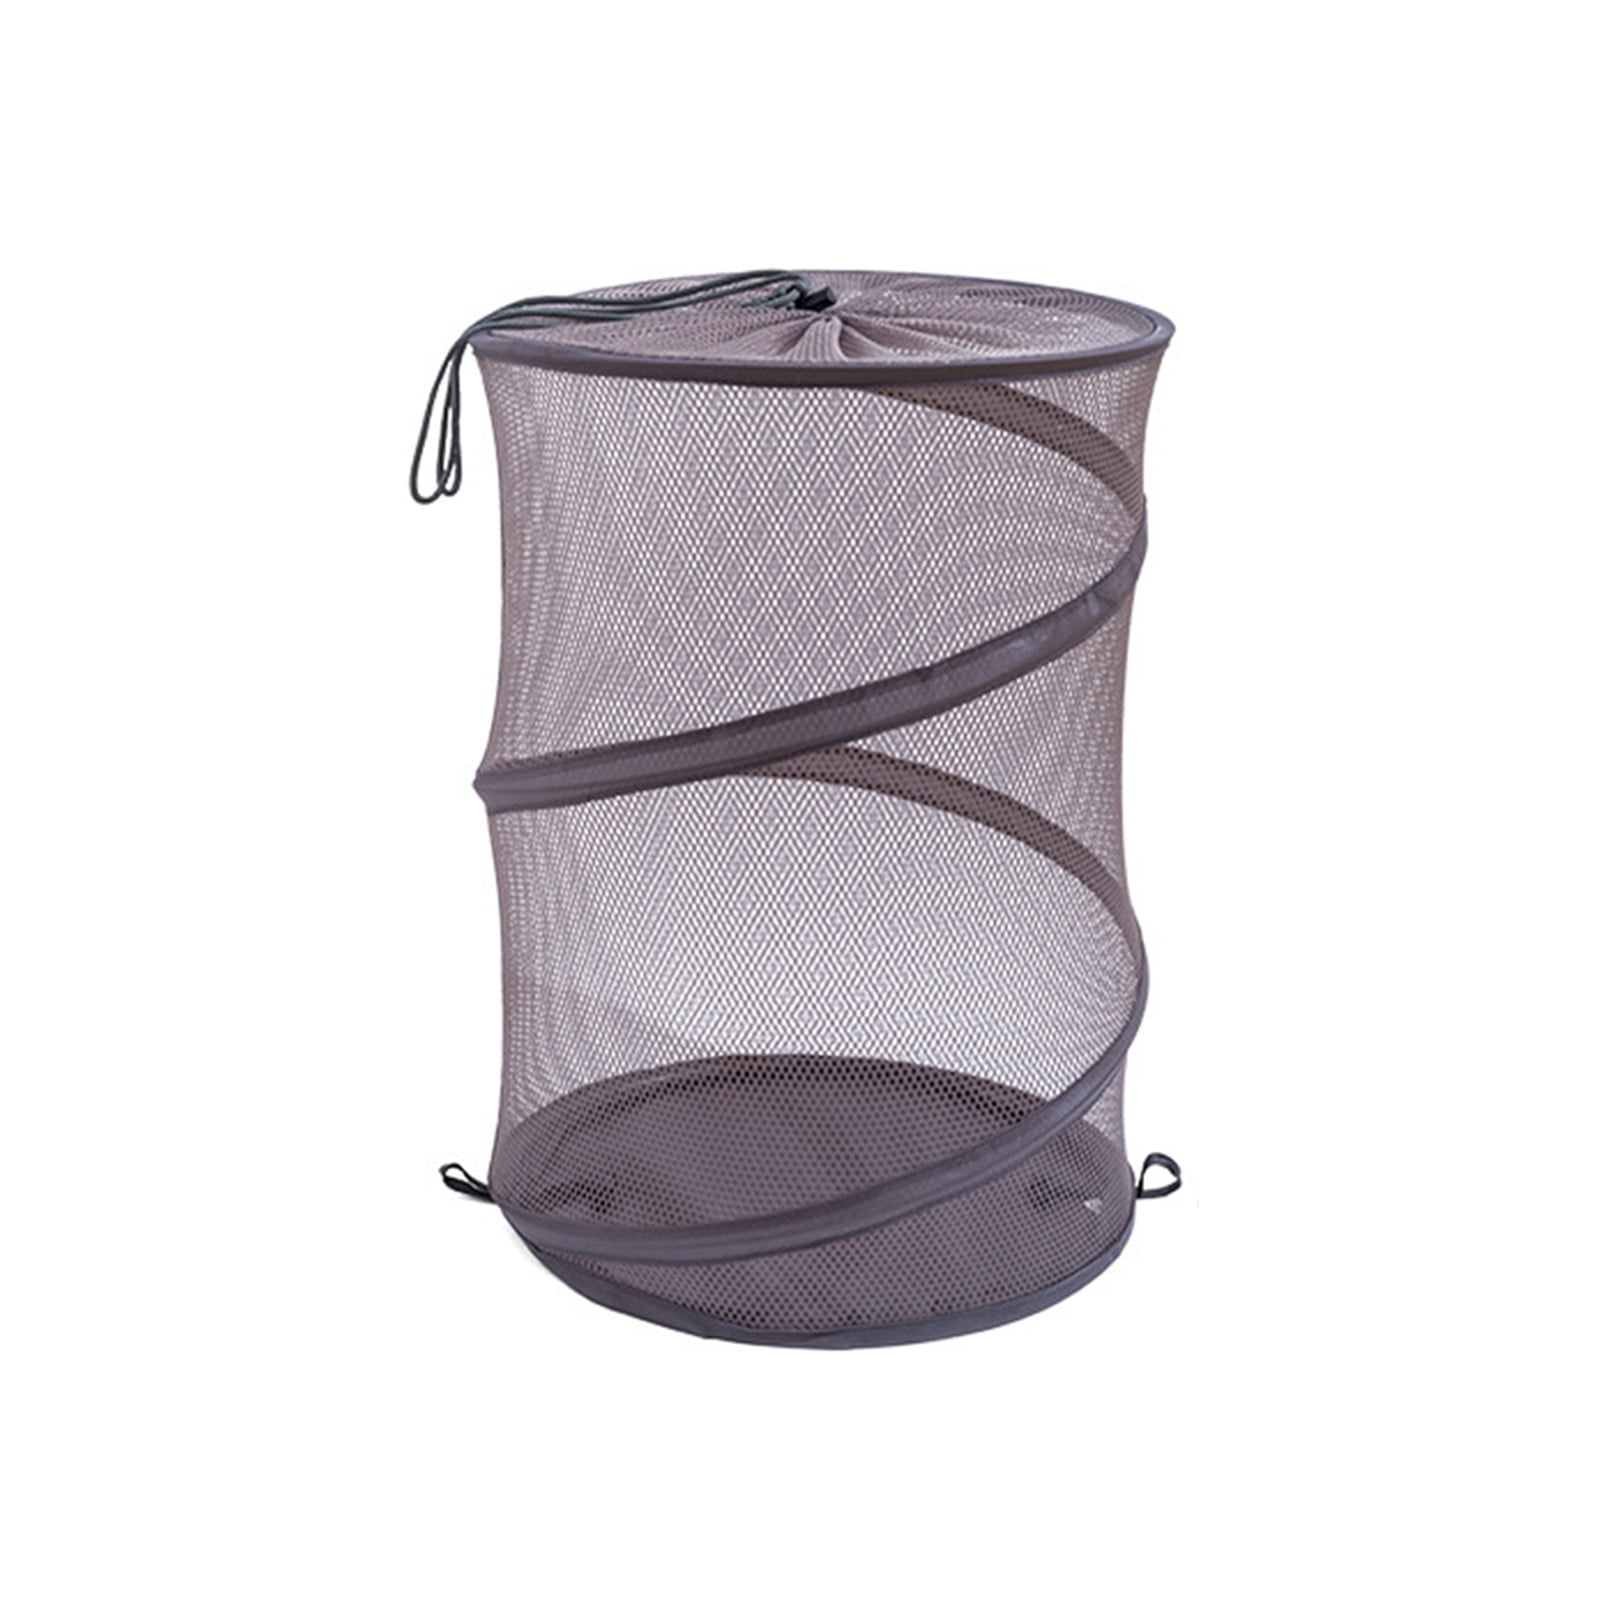 mesh collapsible laundry basket